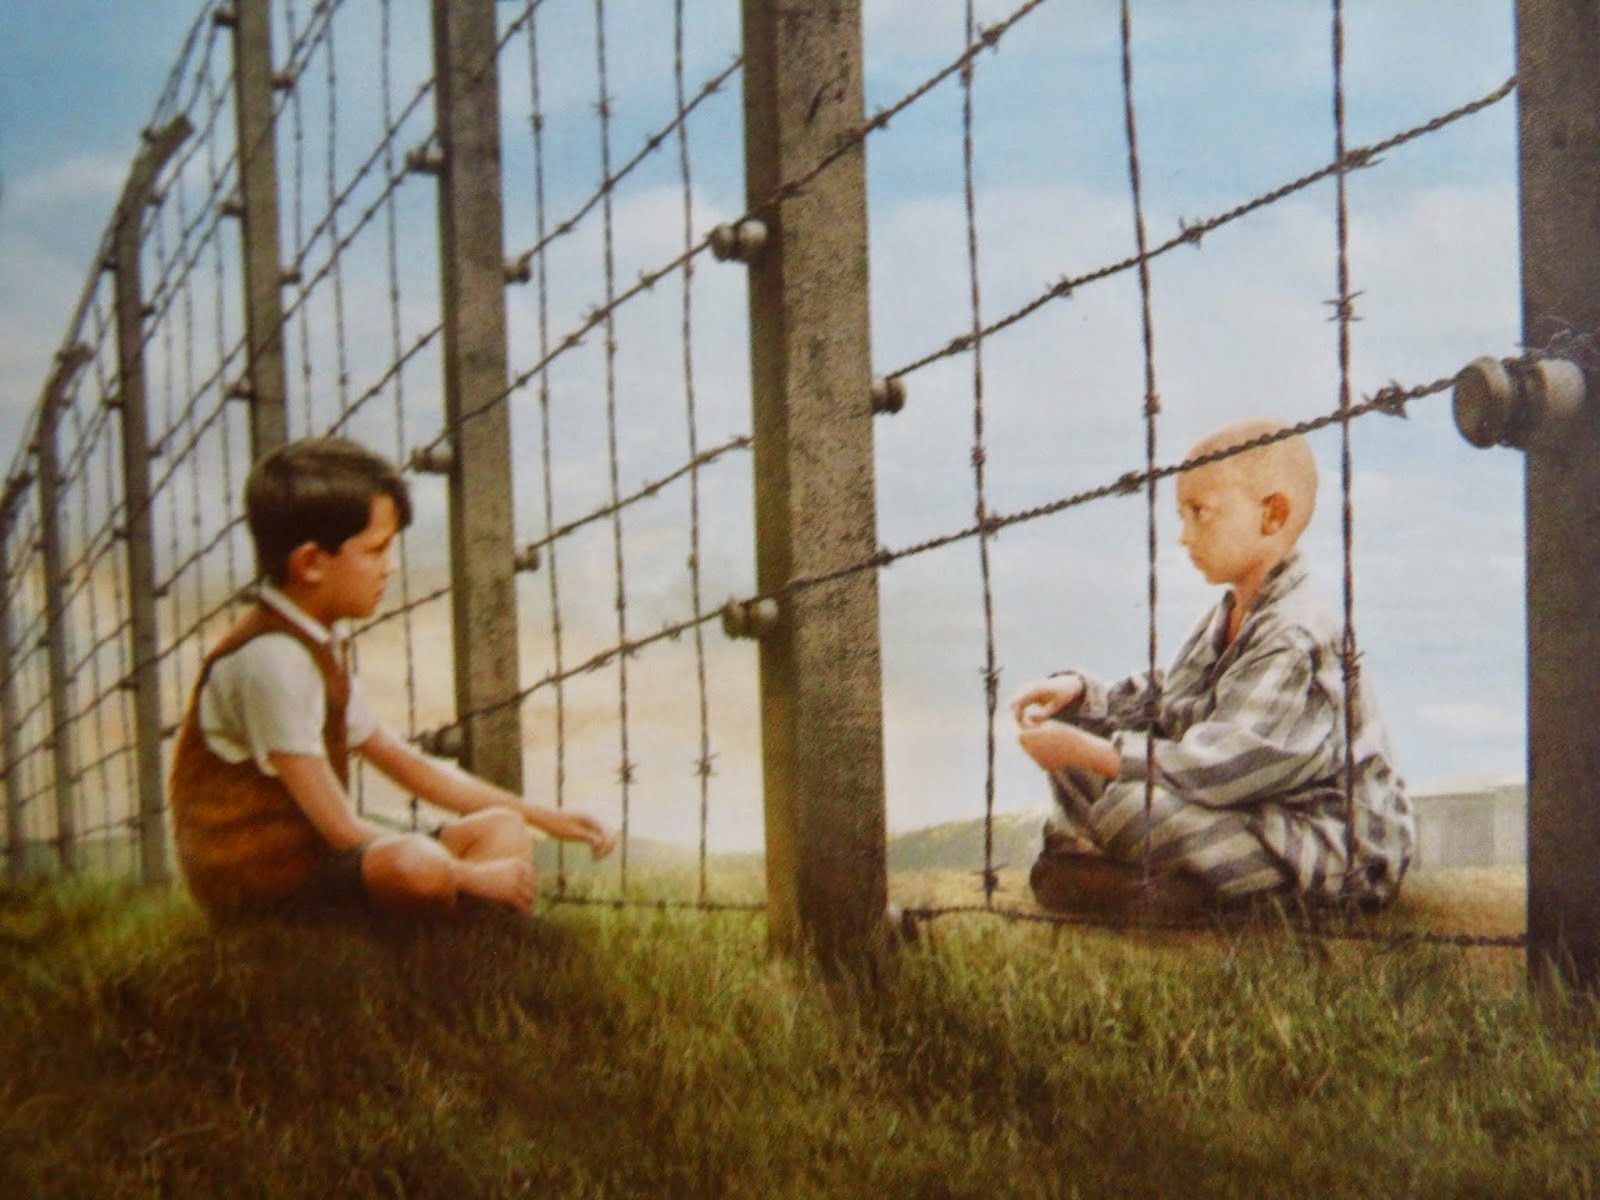 the boy in the striped pajamas theme